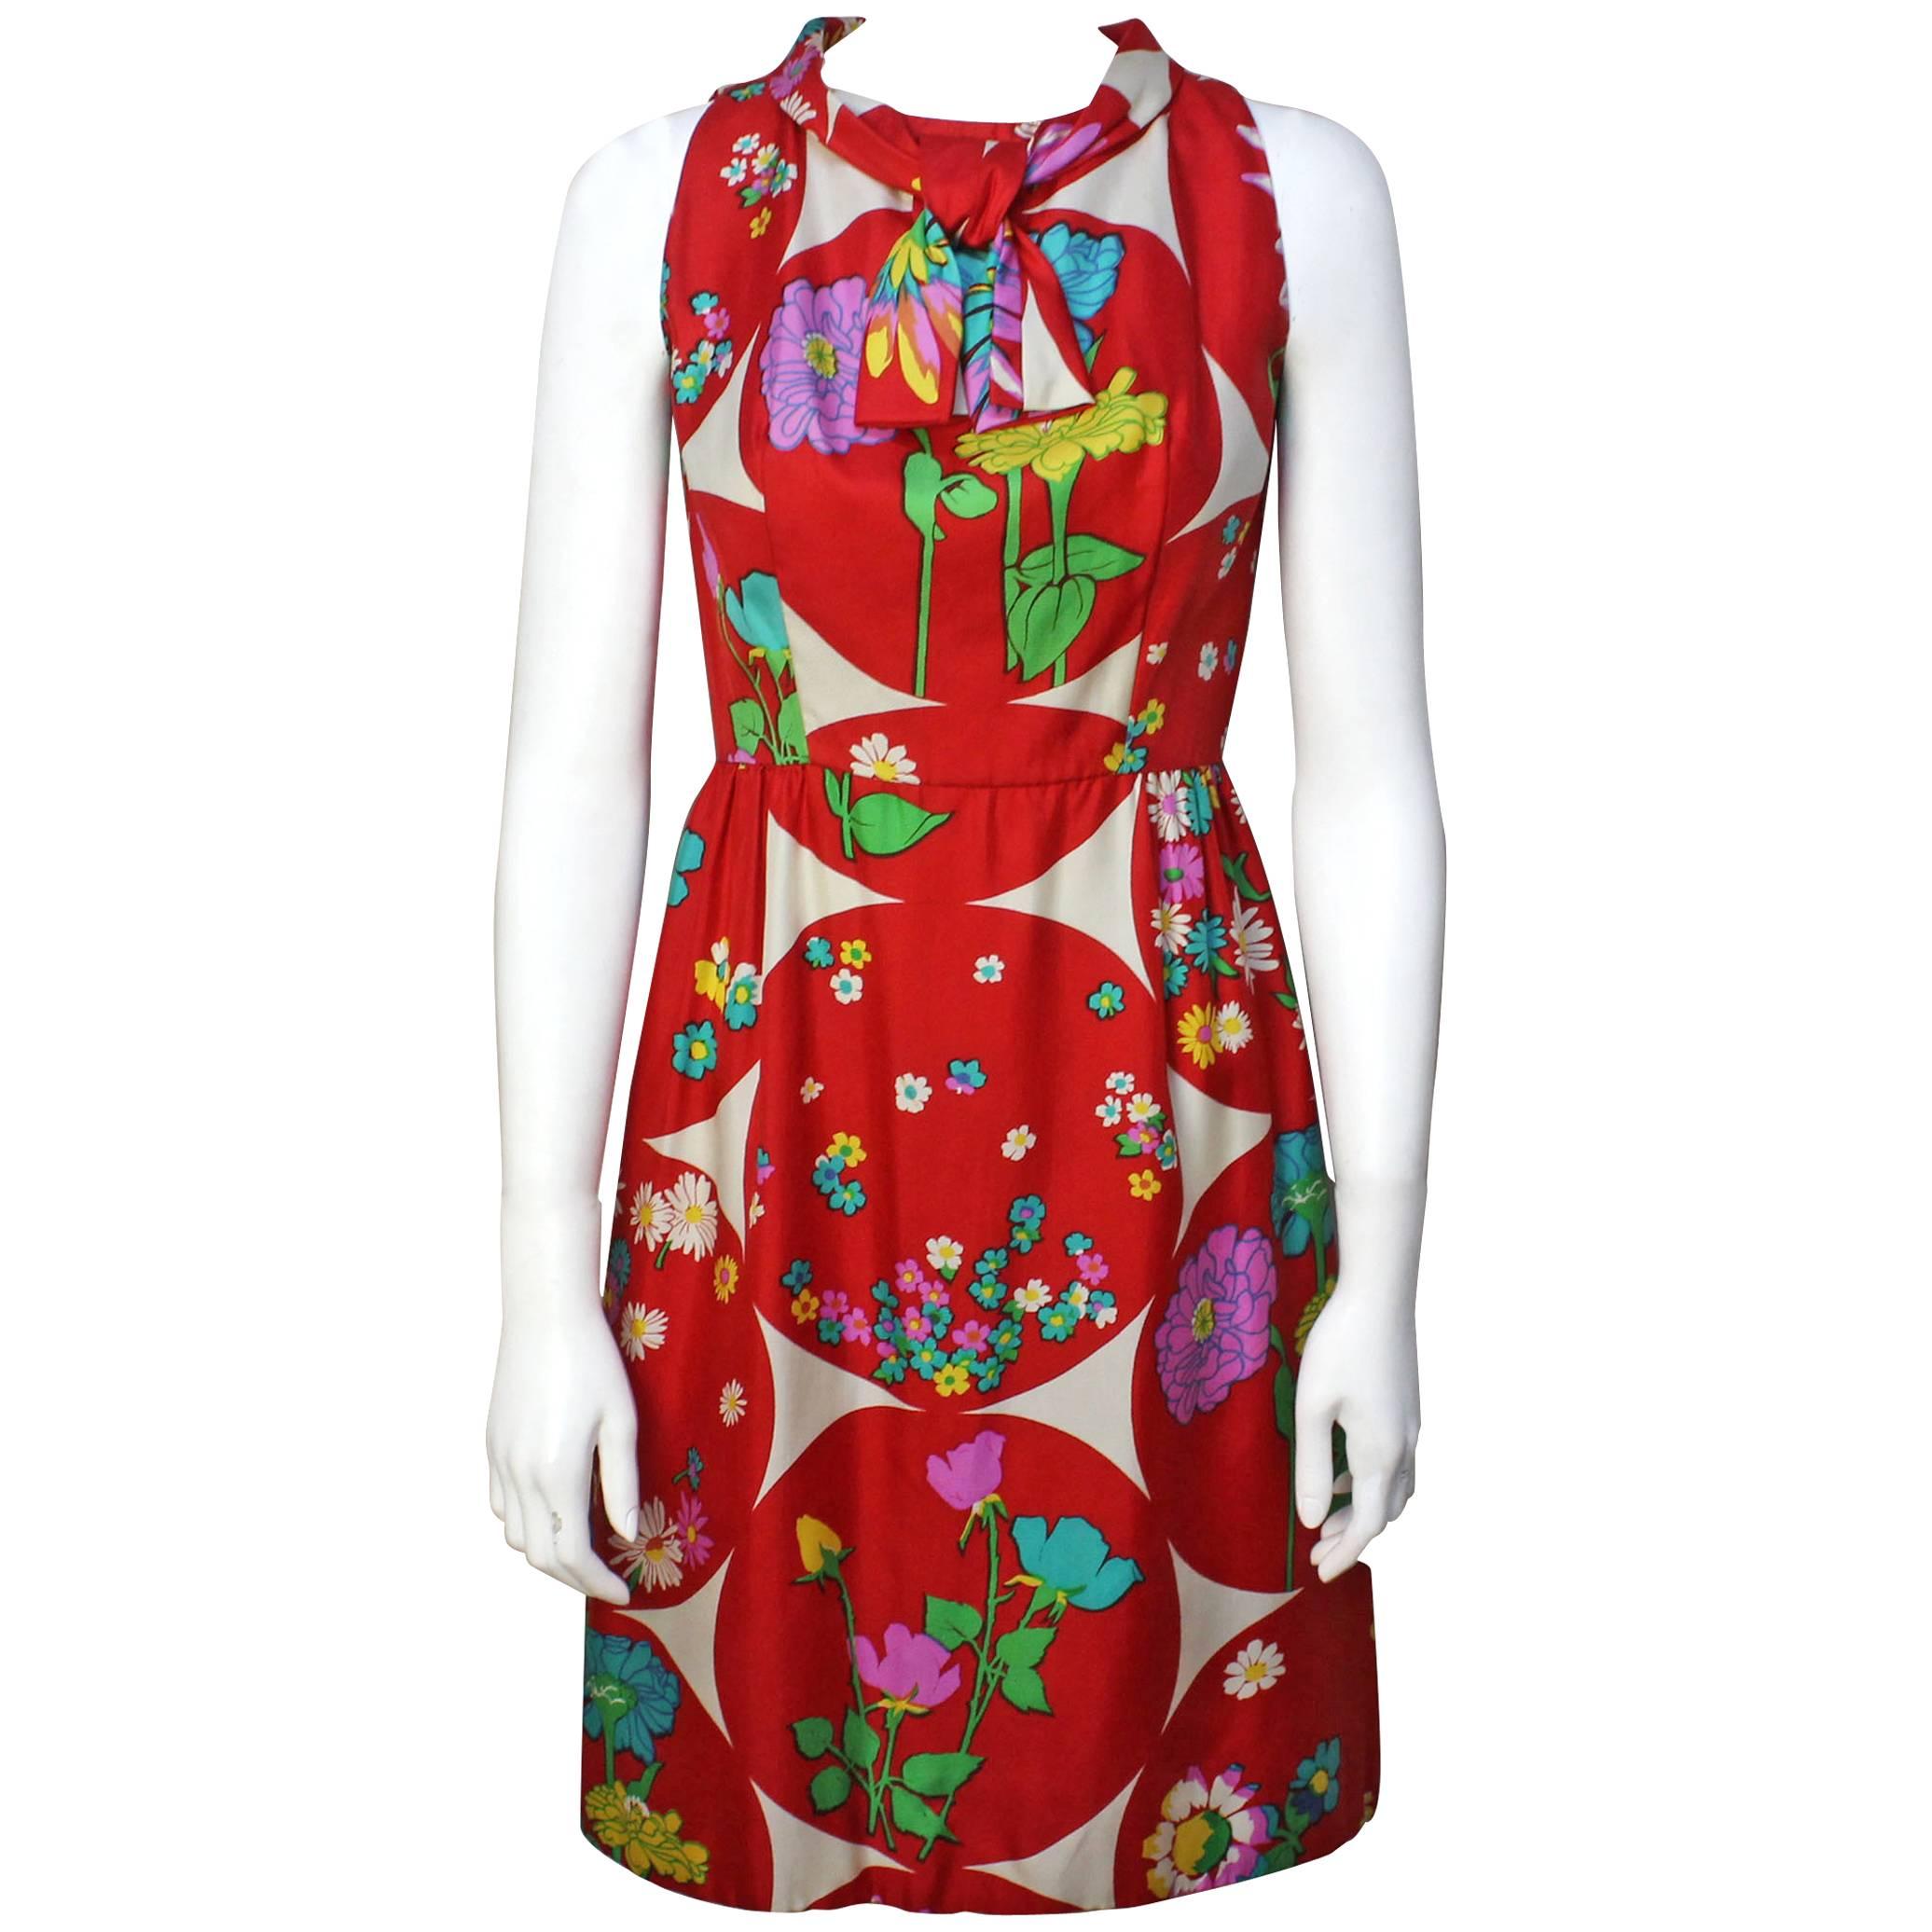 1960s British Moderns by Lito Manalang Silk Floral Dress For Sale